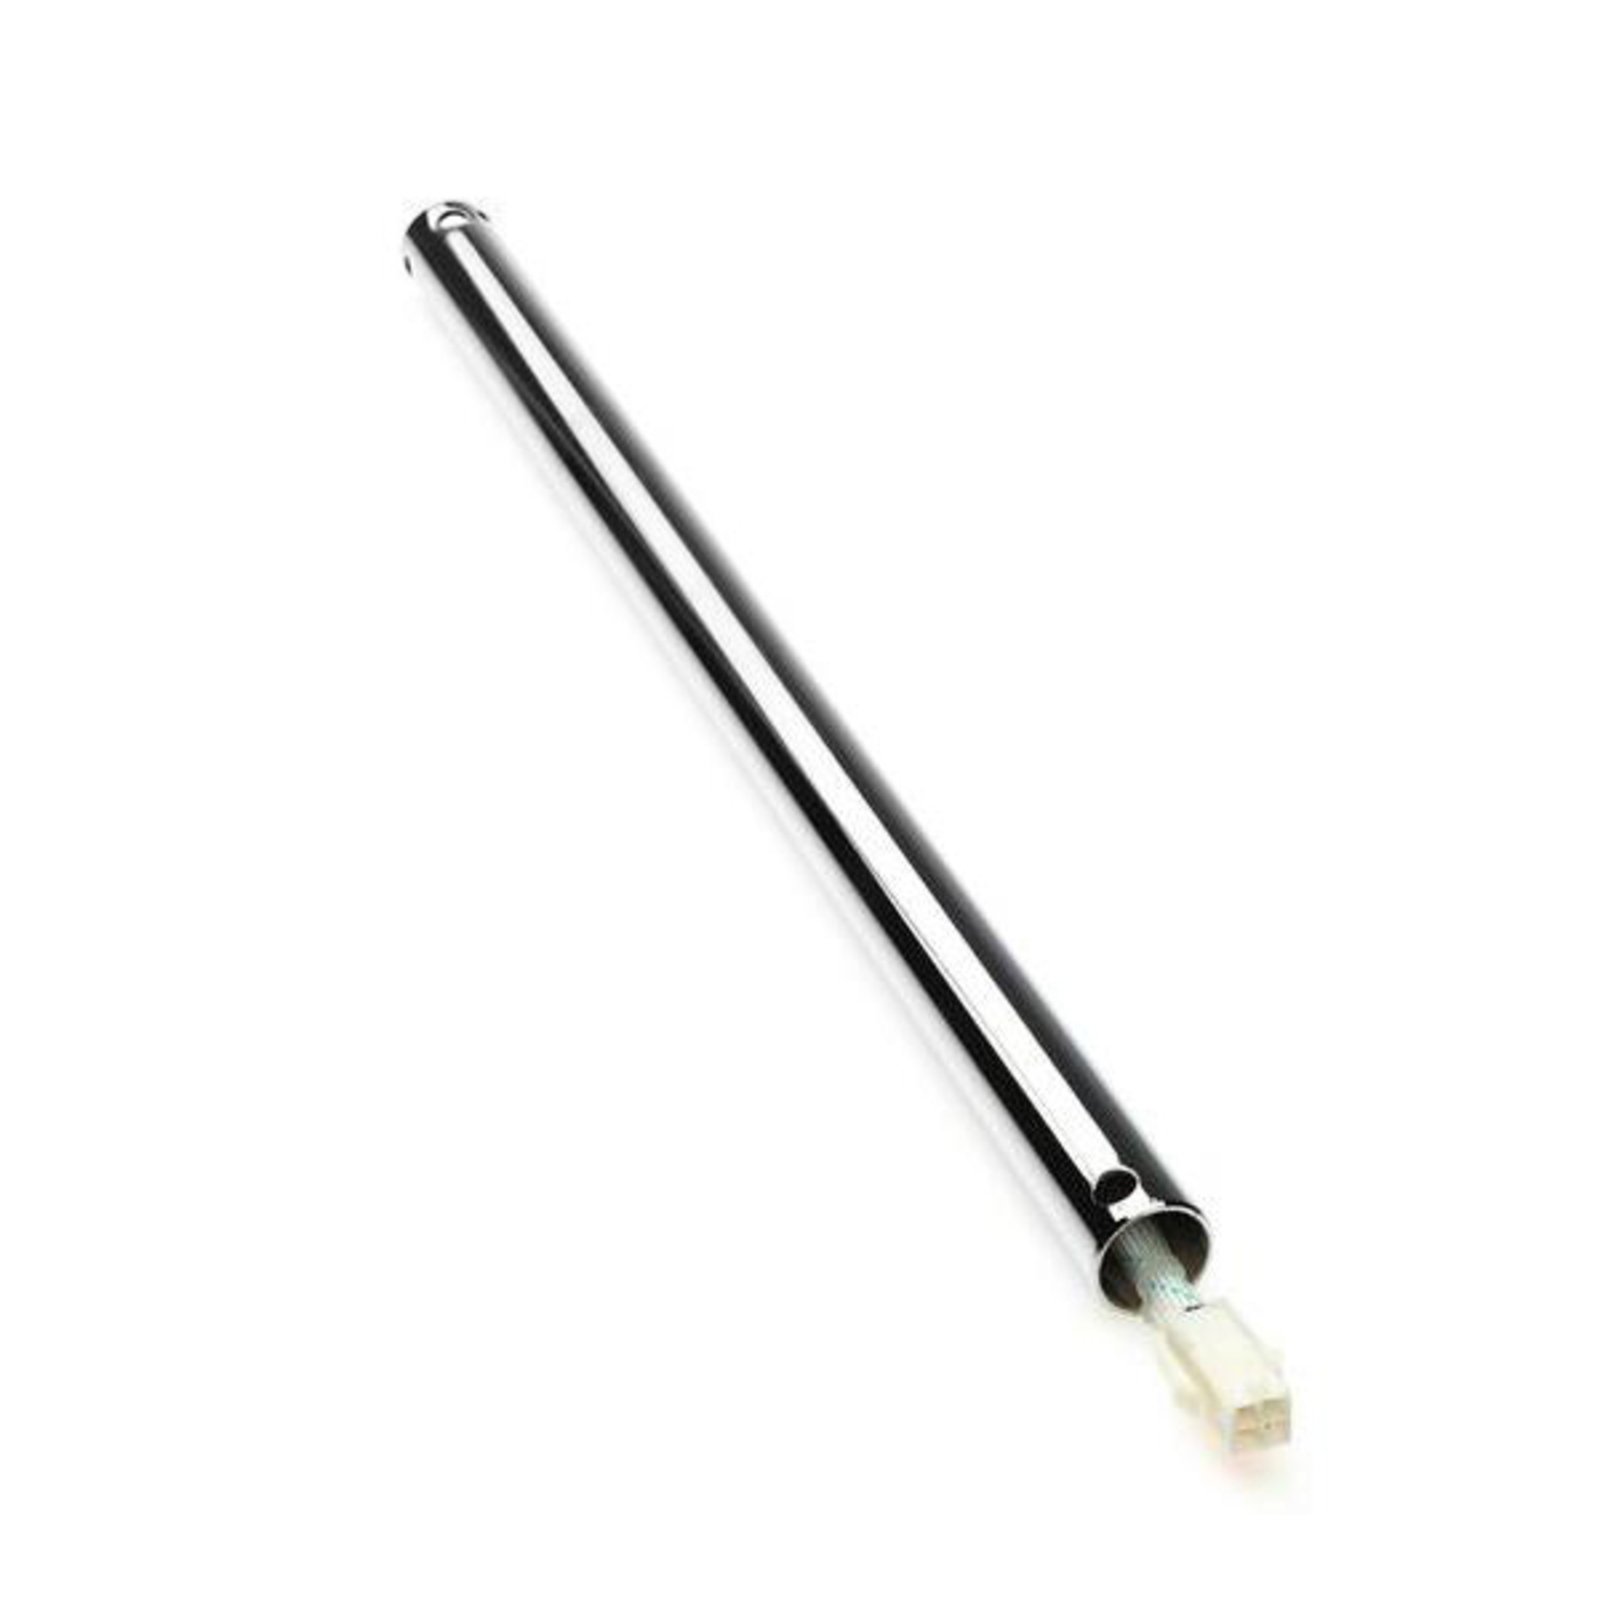 46 cm extension rod in chrome